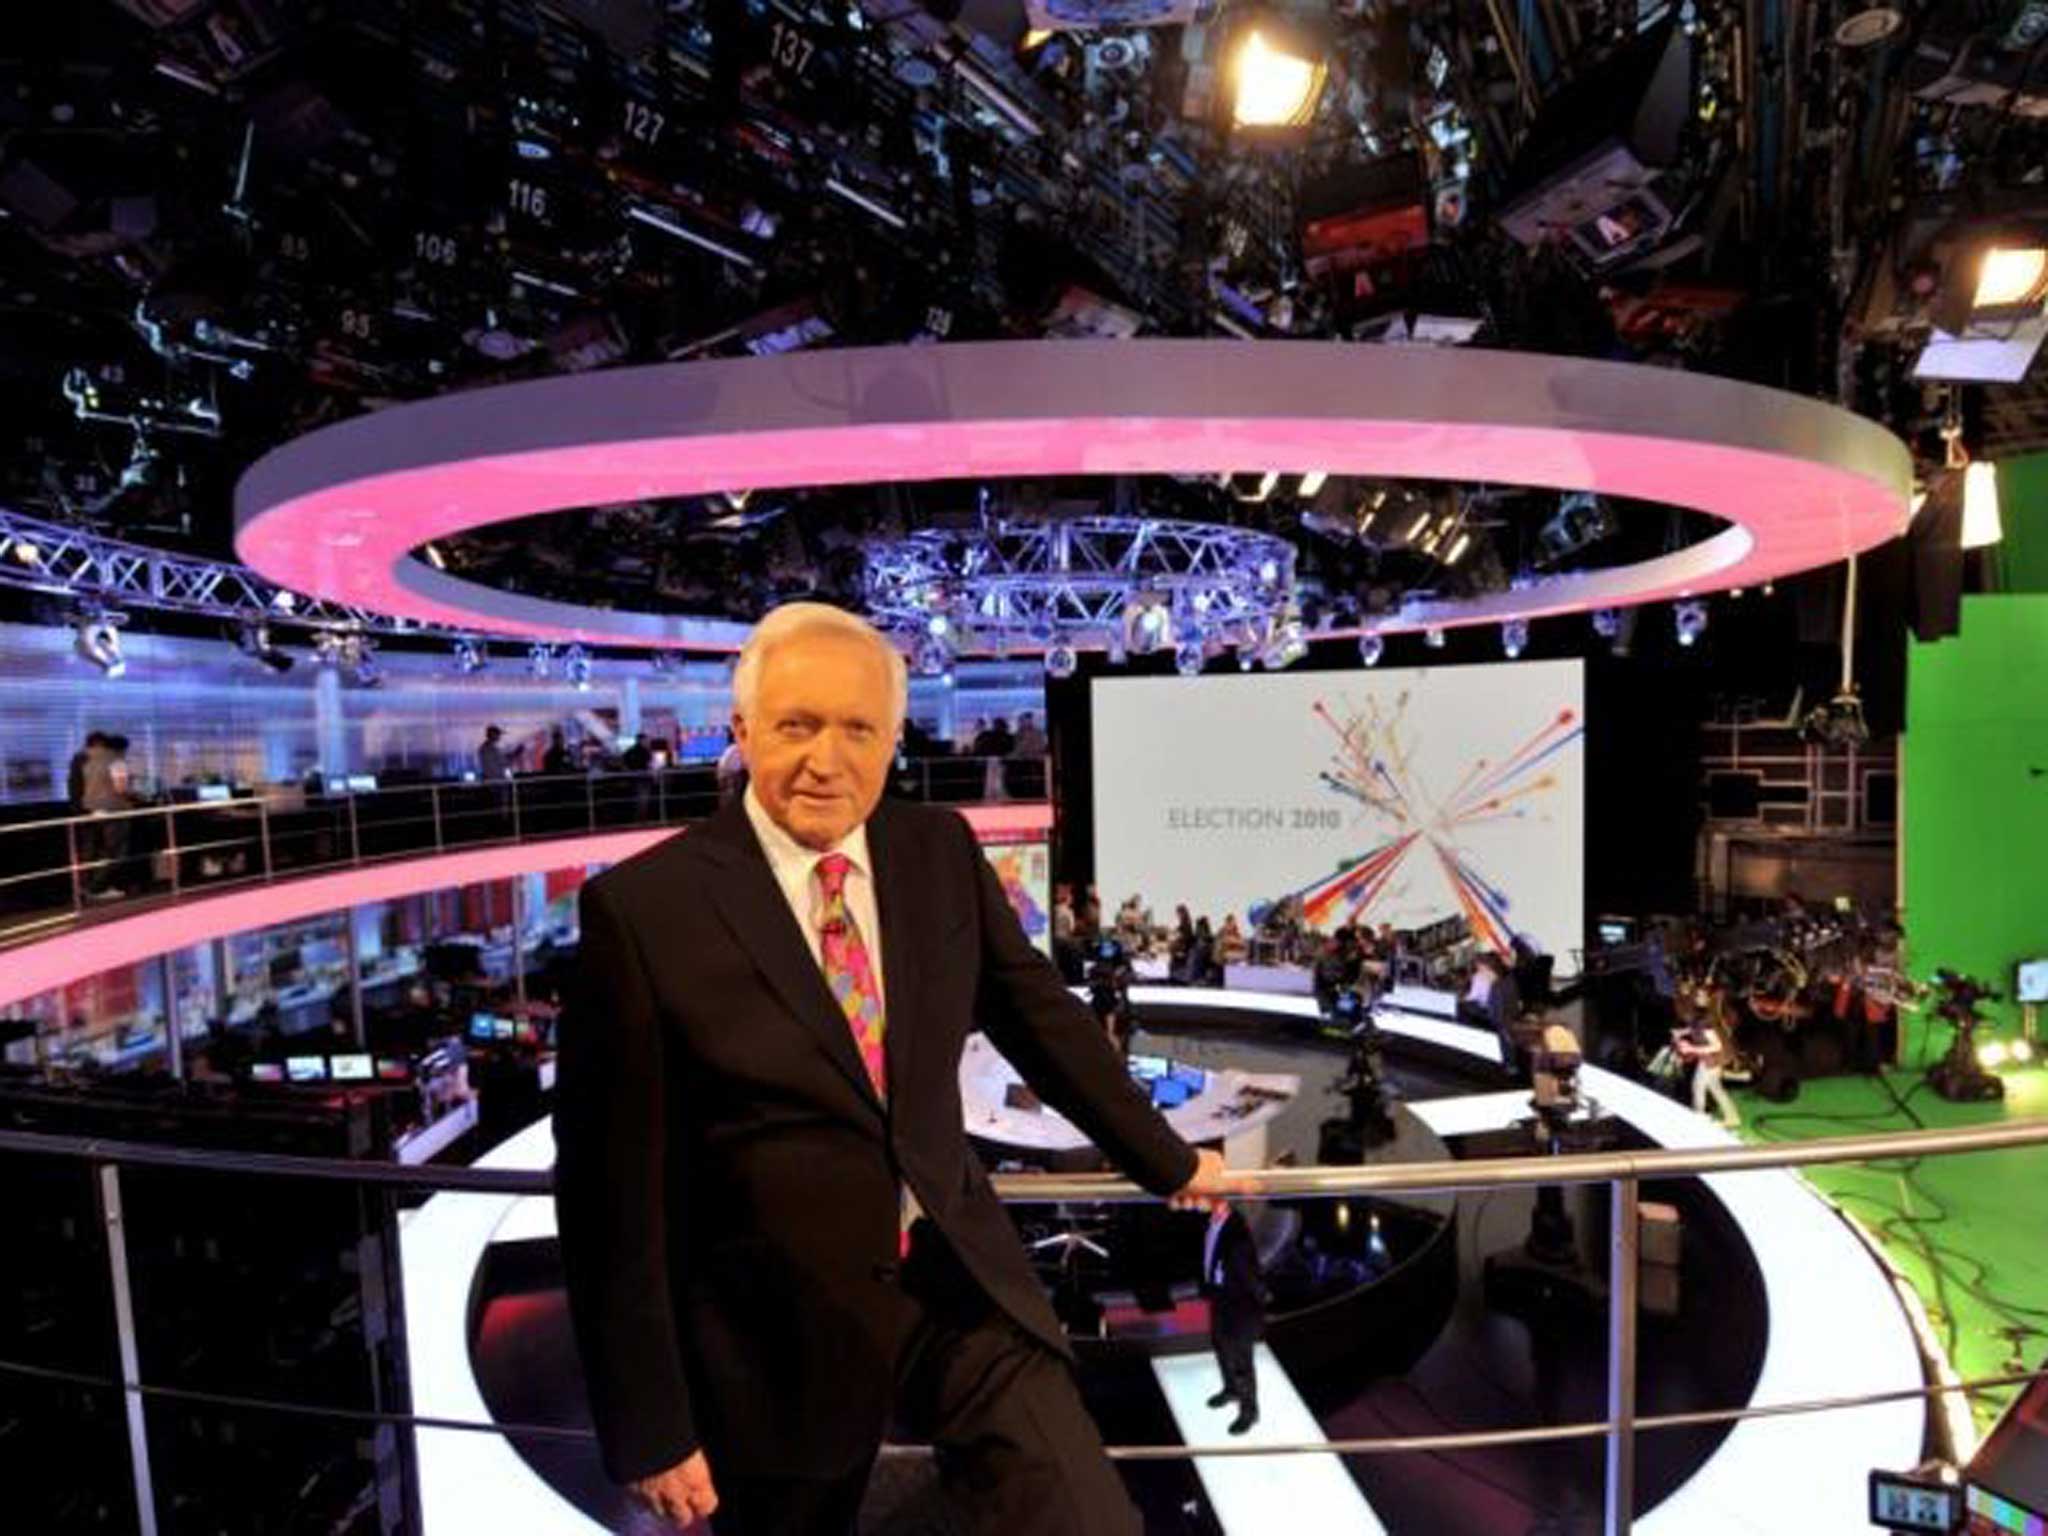 Direct line:David Dimbleby’s mastery of election nights makes him one of few modern broadcasters who fulfils the idealism of Lord Reith